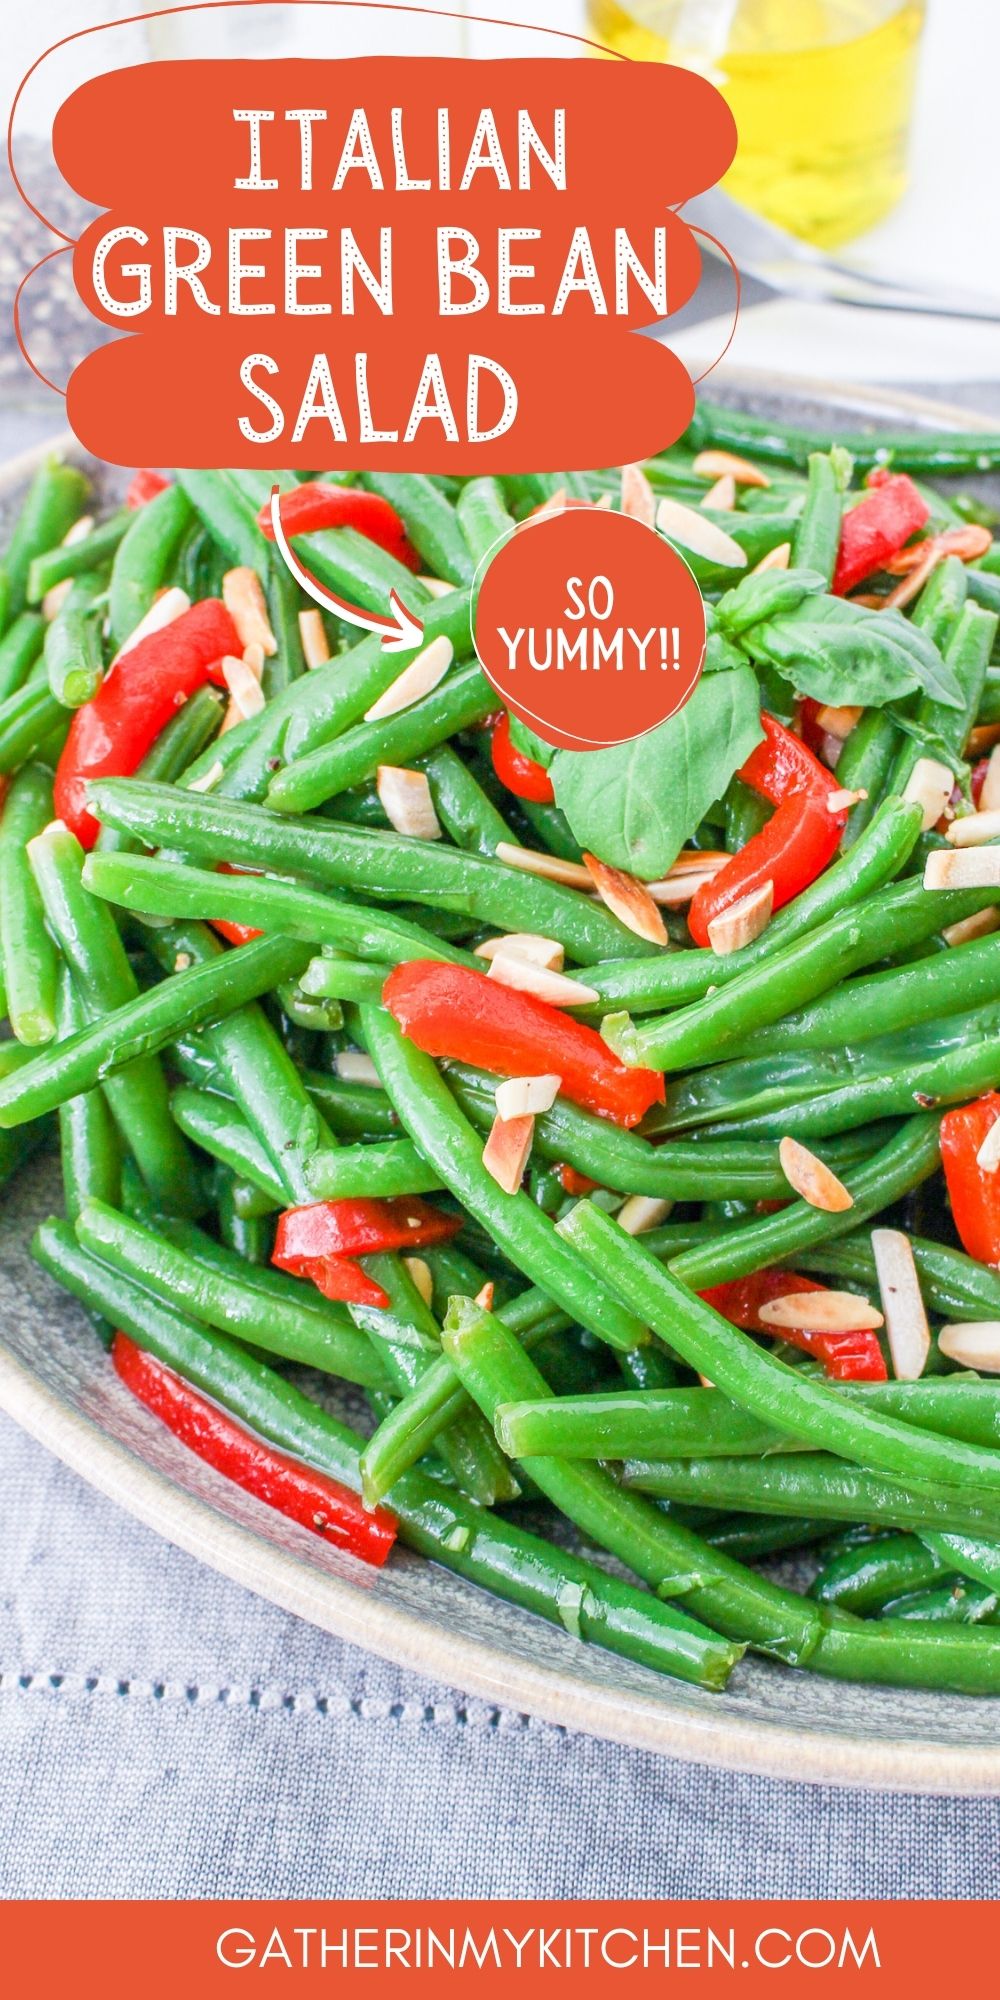 Pin image: tops says "Italian Green Bean Salad" and background is a plate of green bean salad.